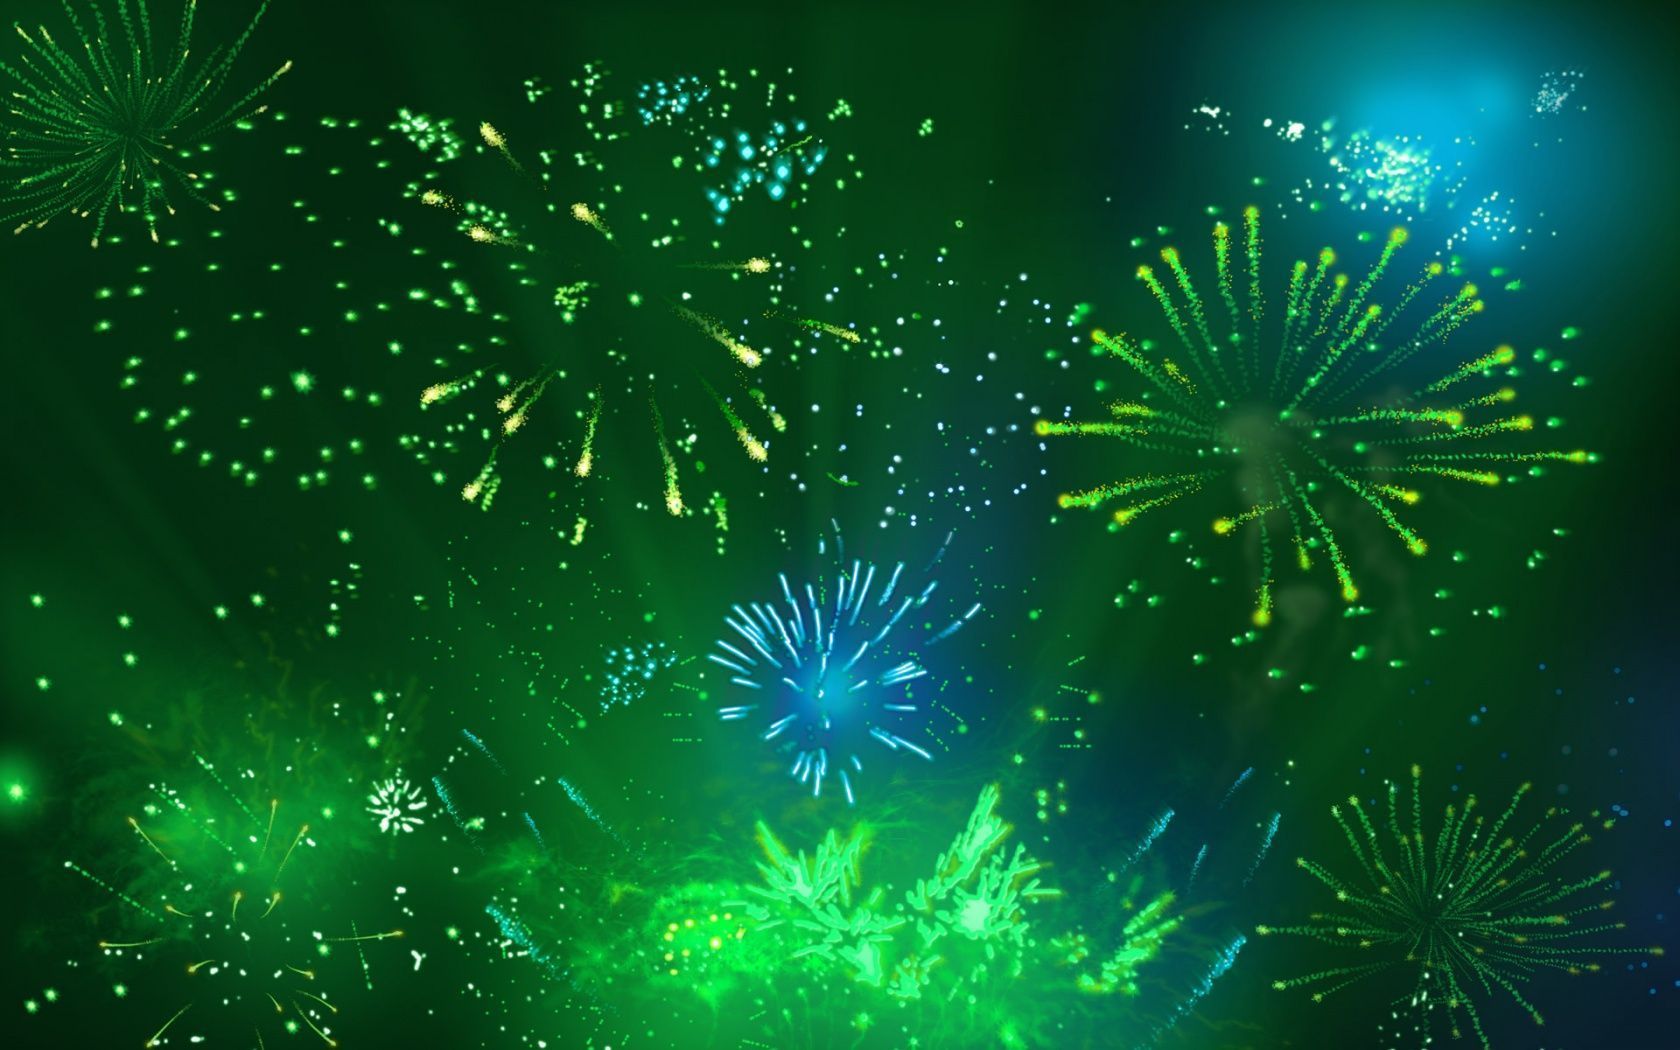 Green Fireworks 2 Wallpapers | HD Wallpapers